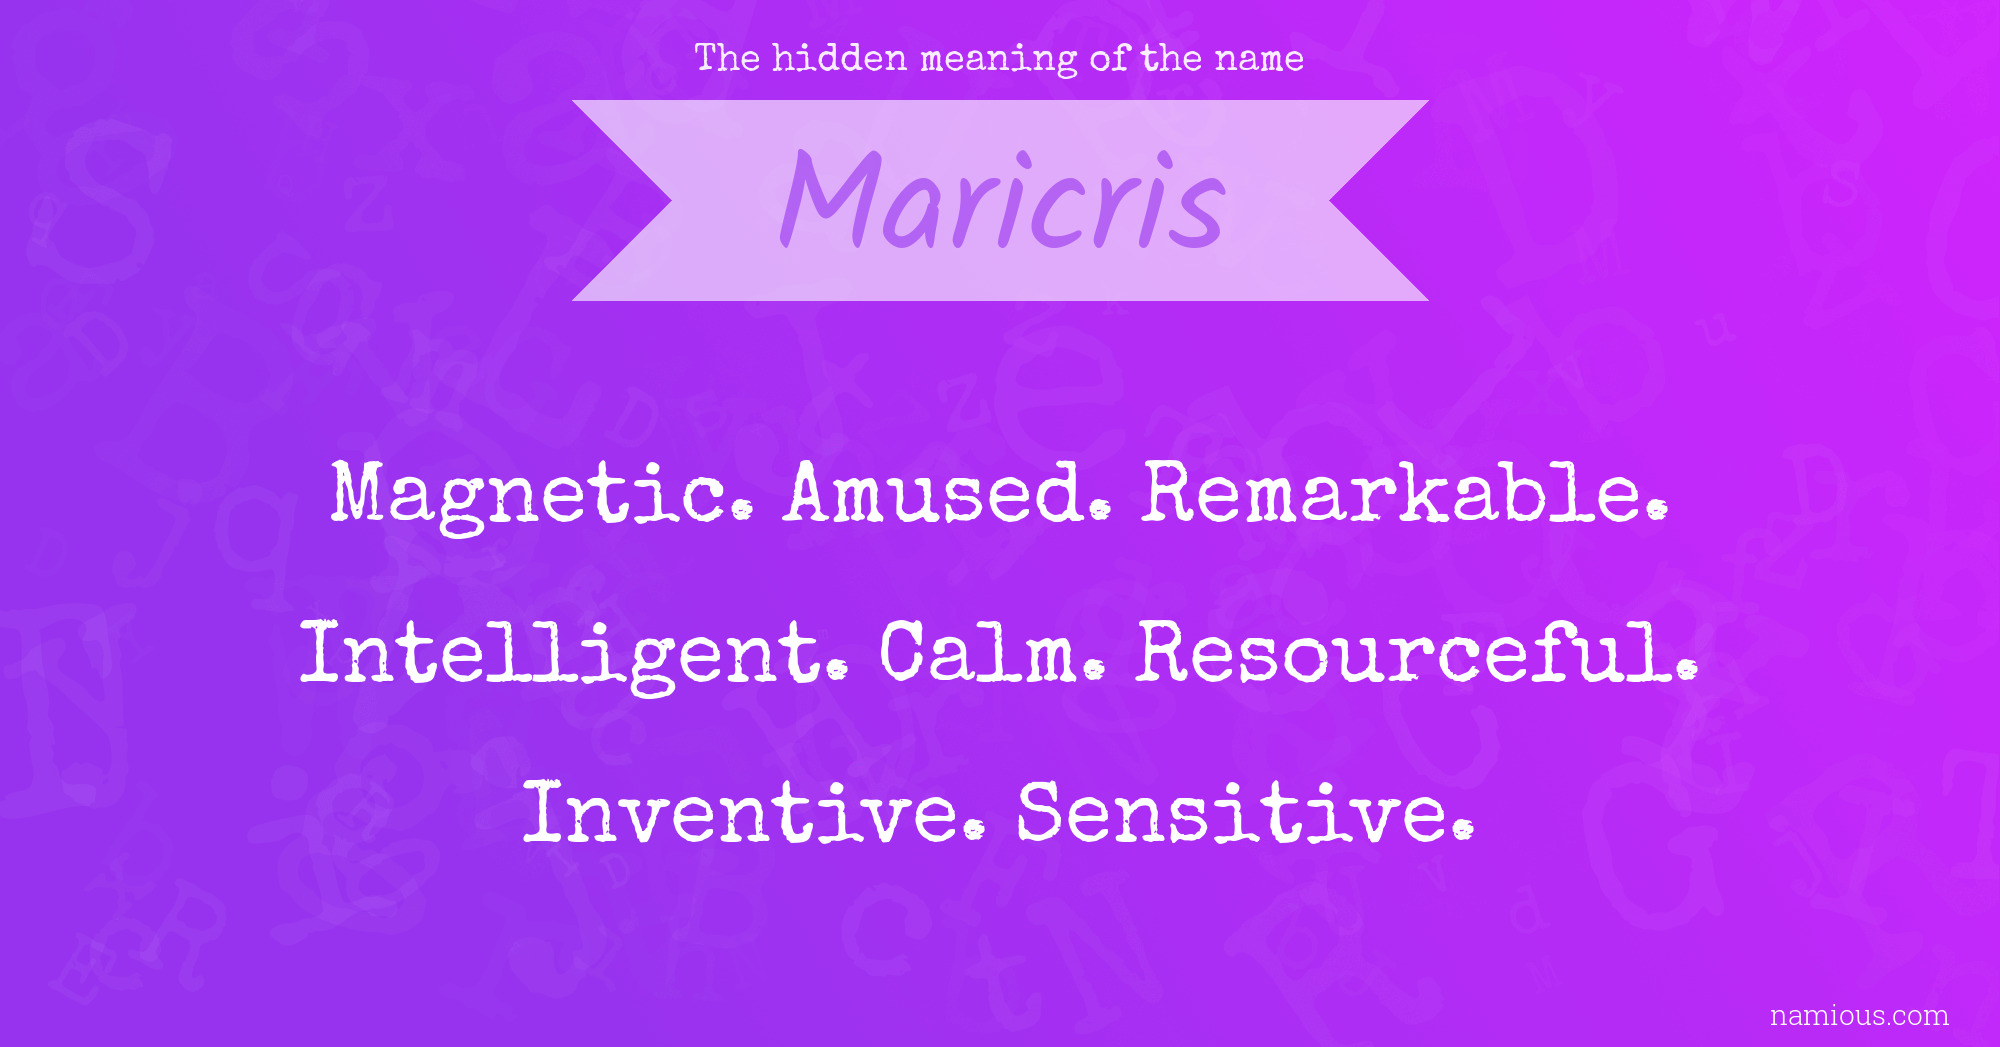 The hidden meaning of the name Maricris